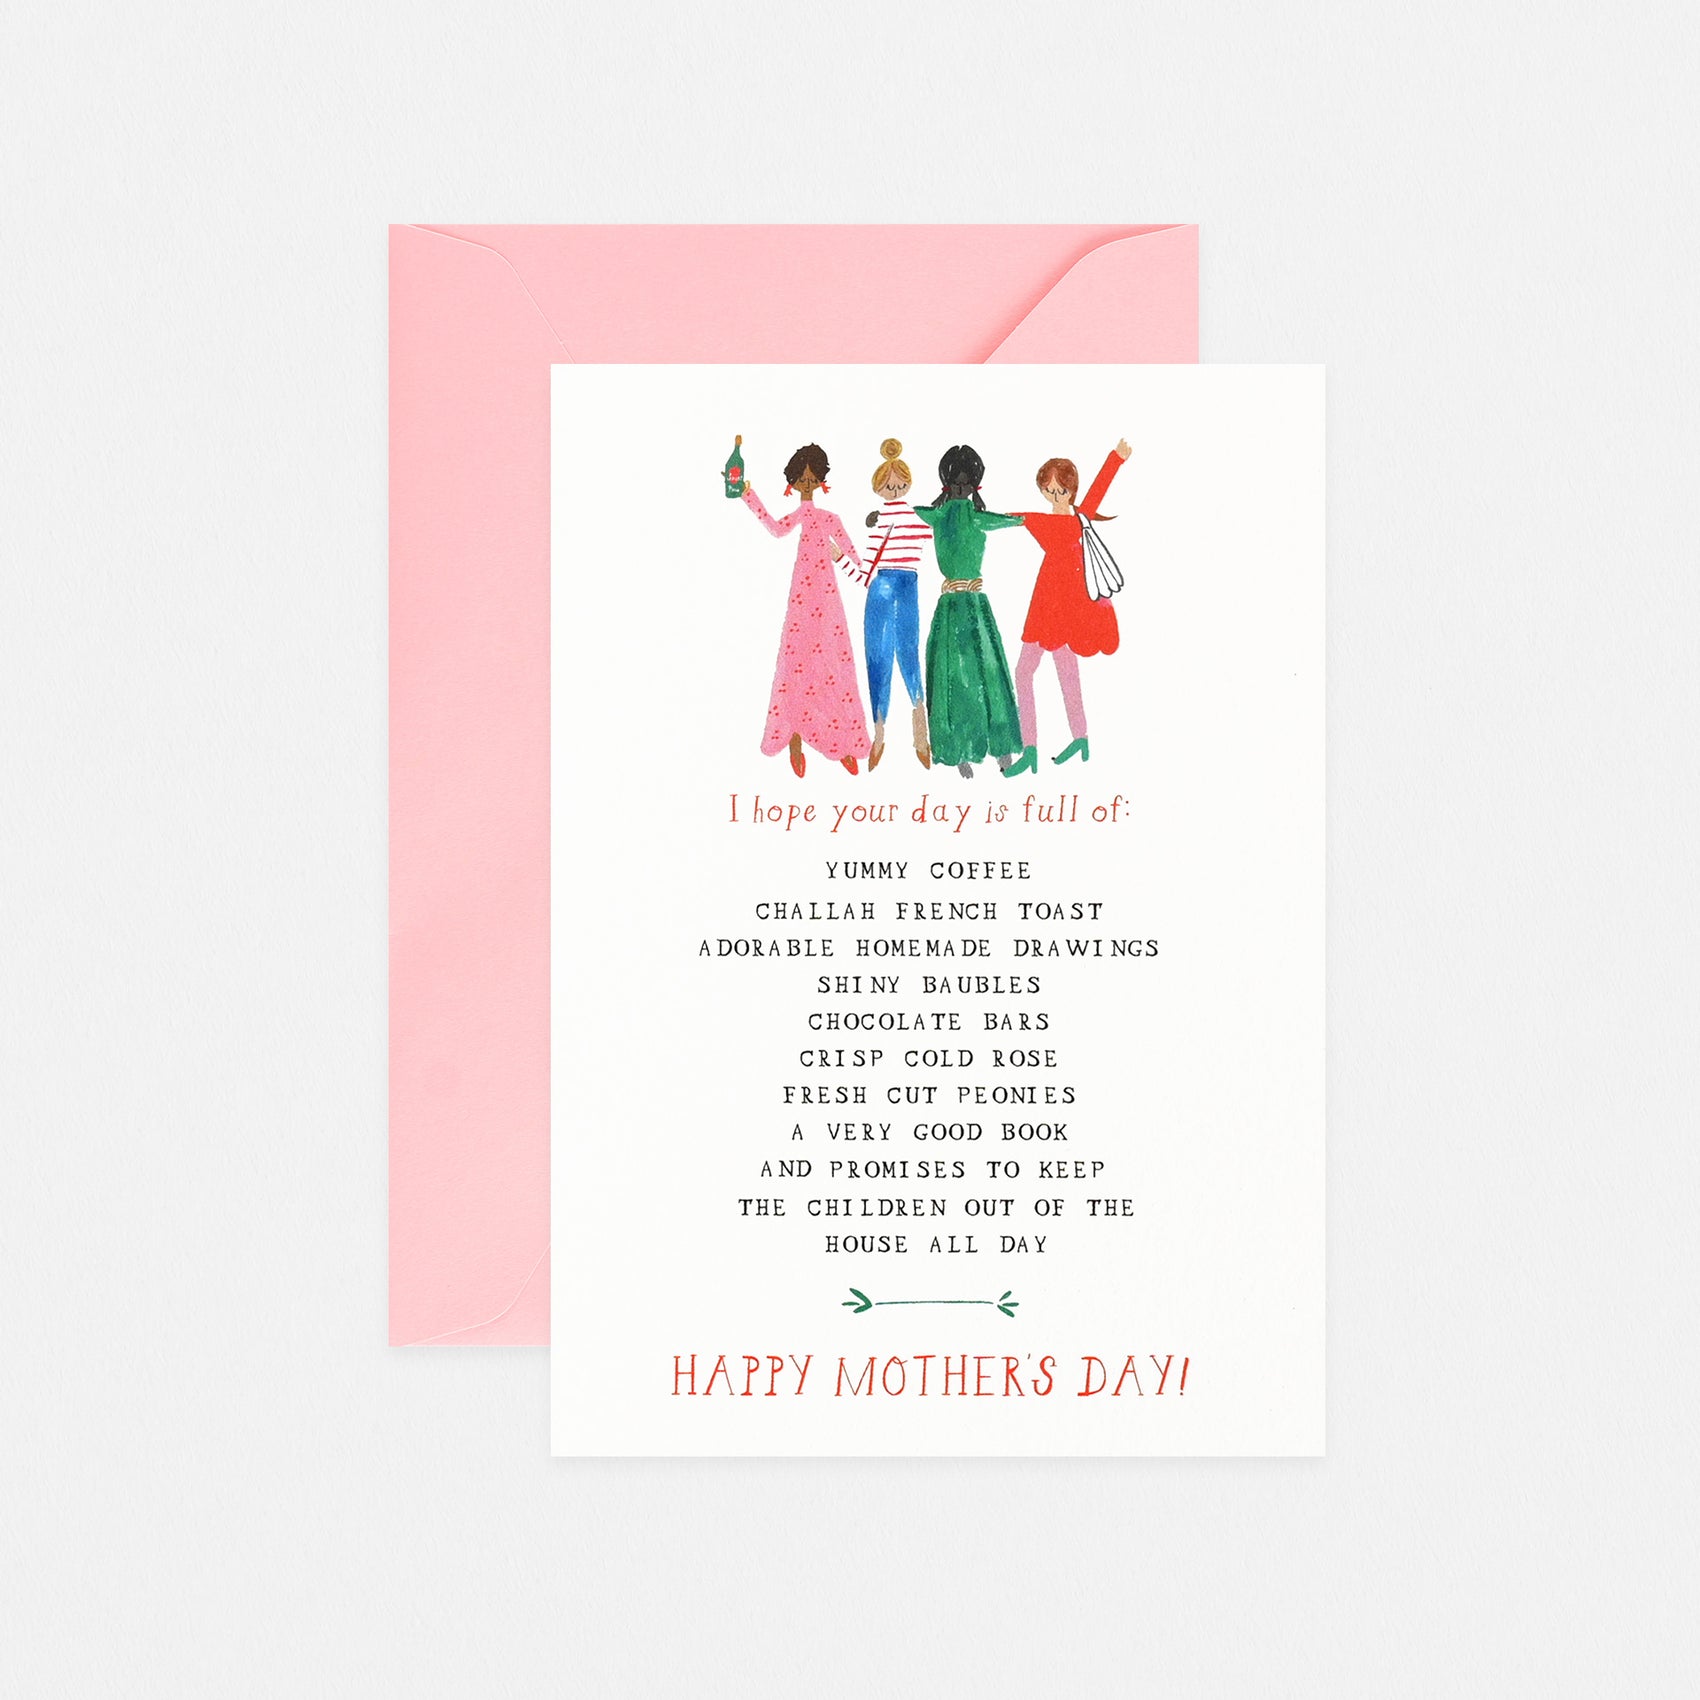 Mr. Boddington's Studio Have A Good Morning Mother's Day Card 